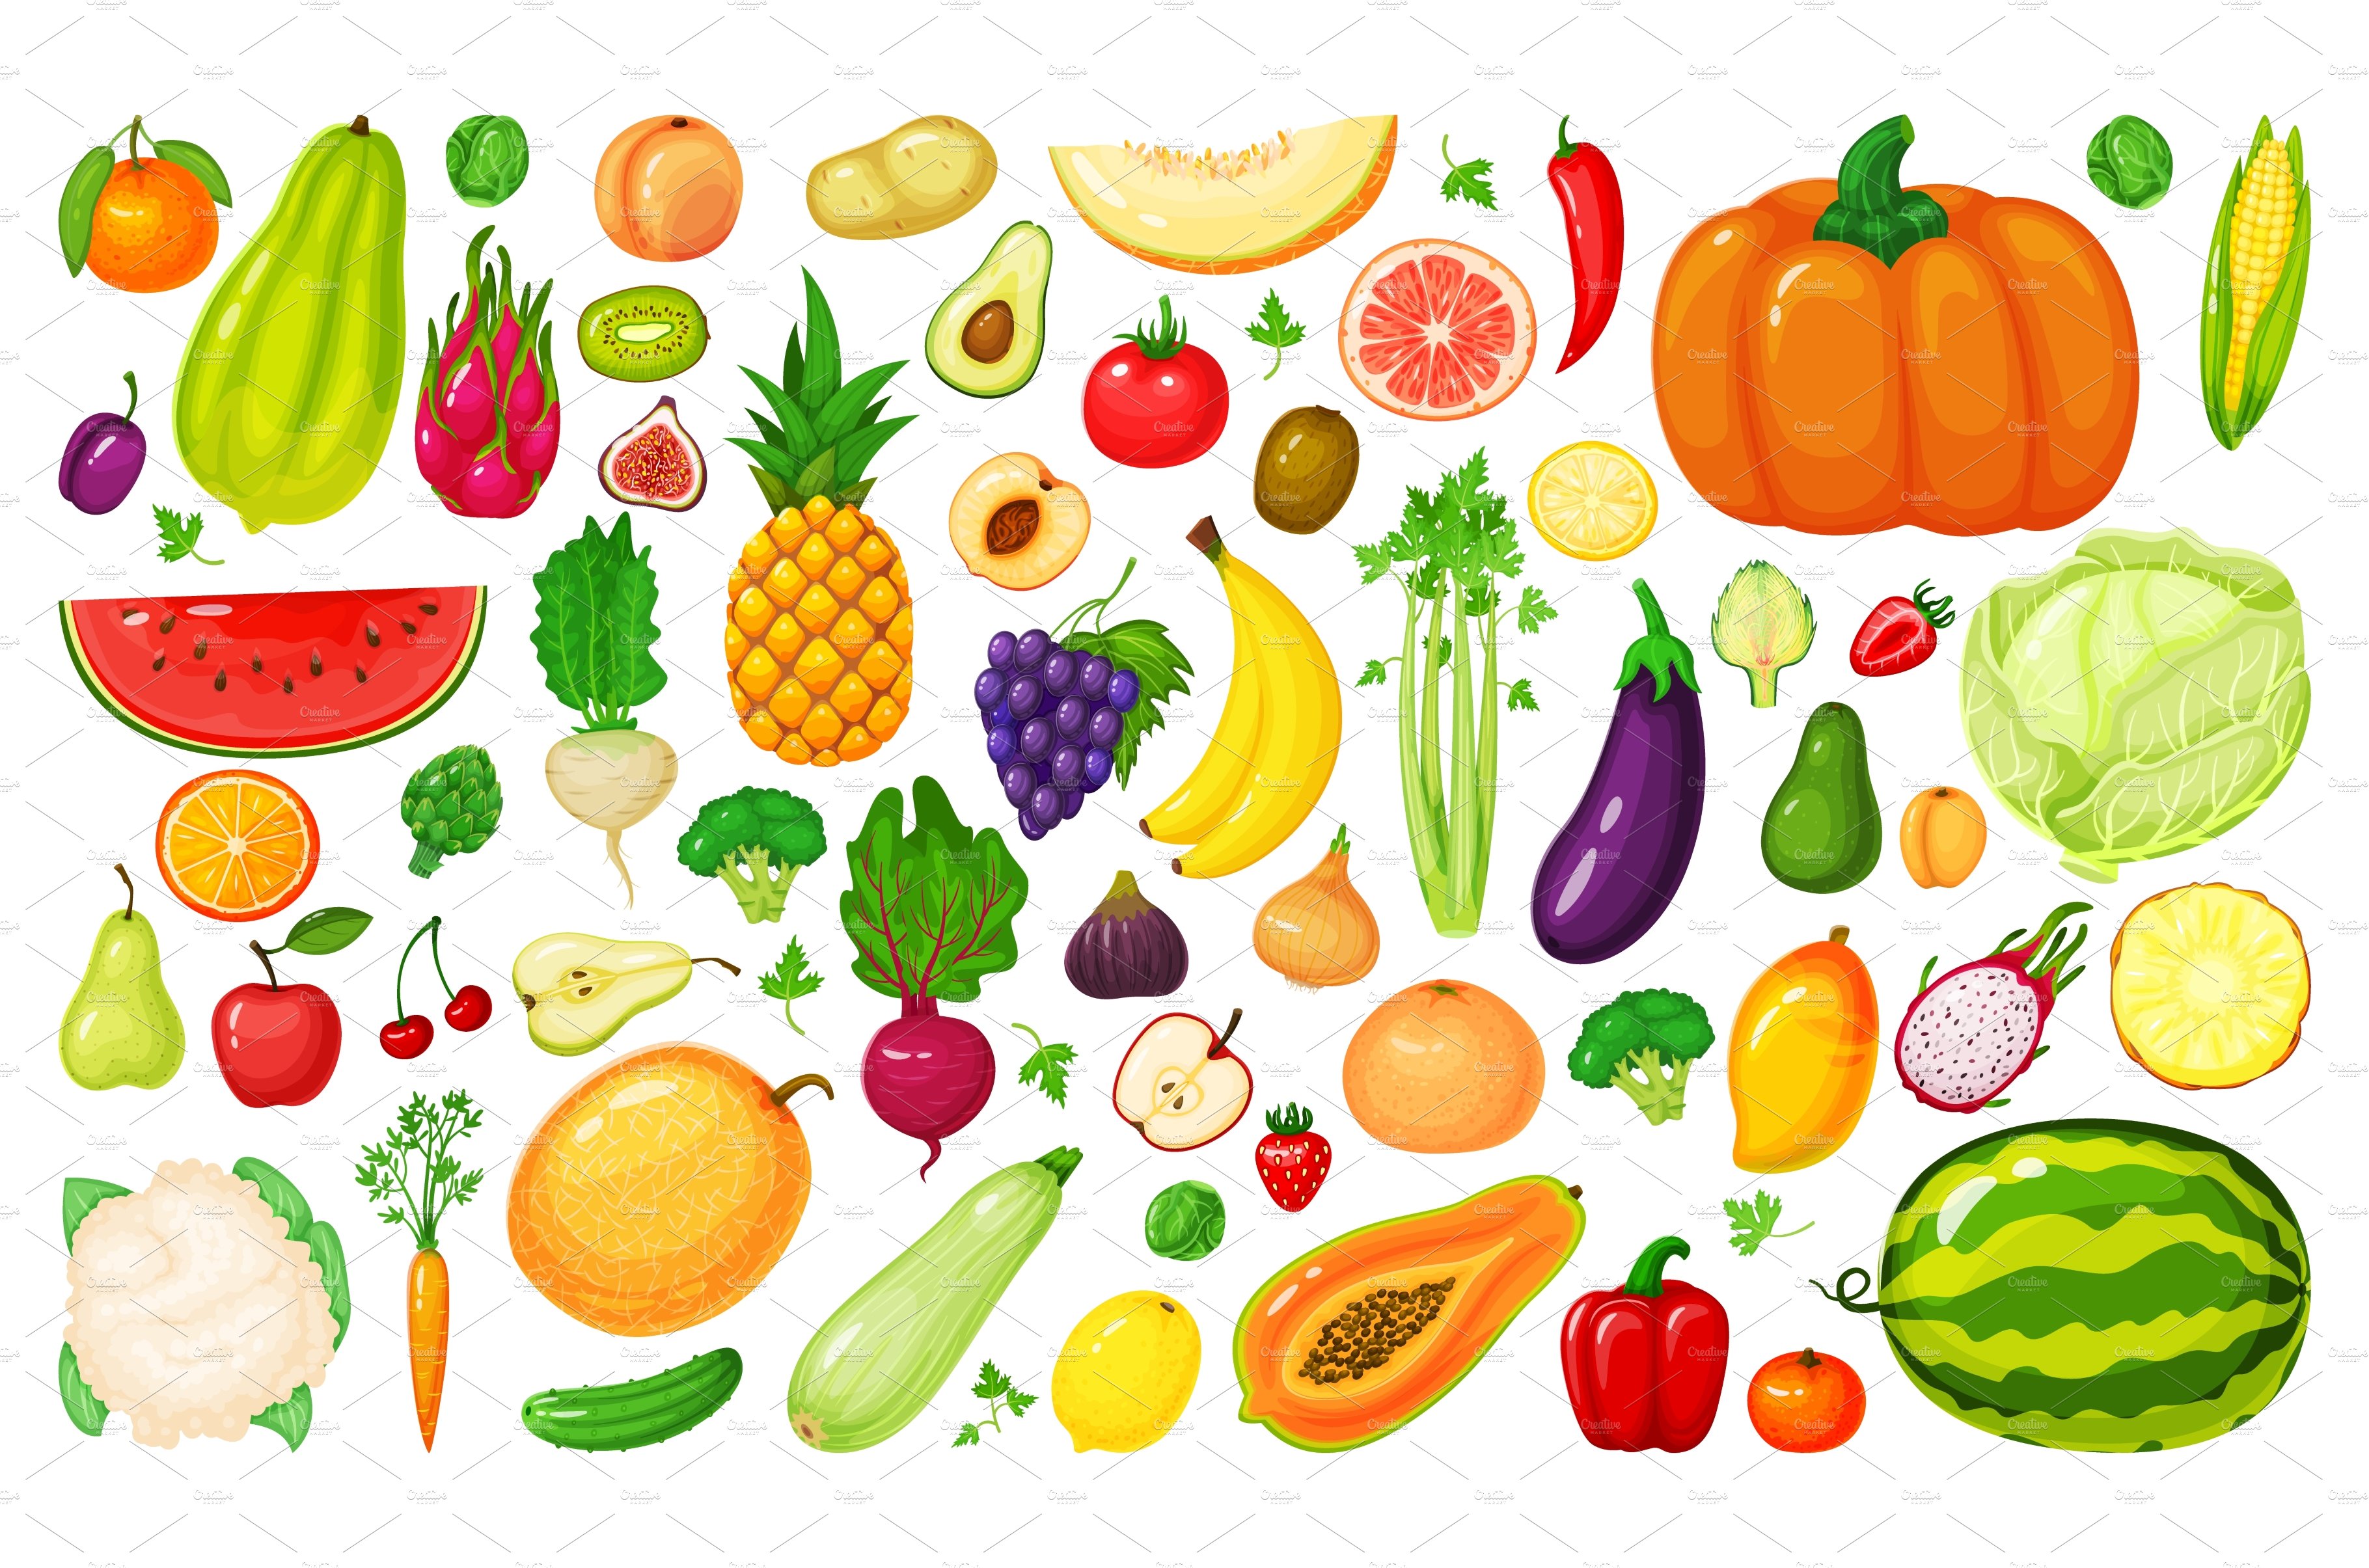 Cartoon fruits and vegetables cover image.